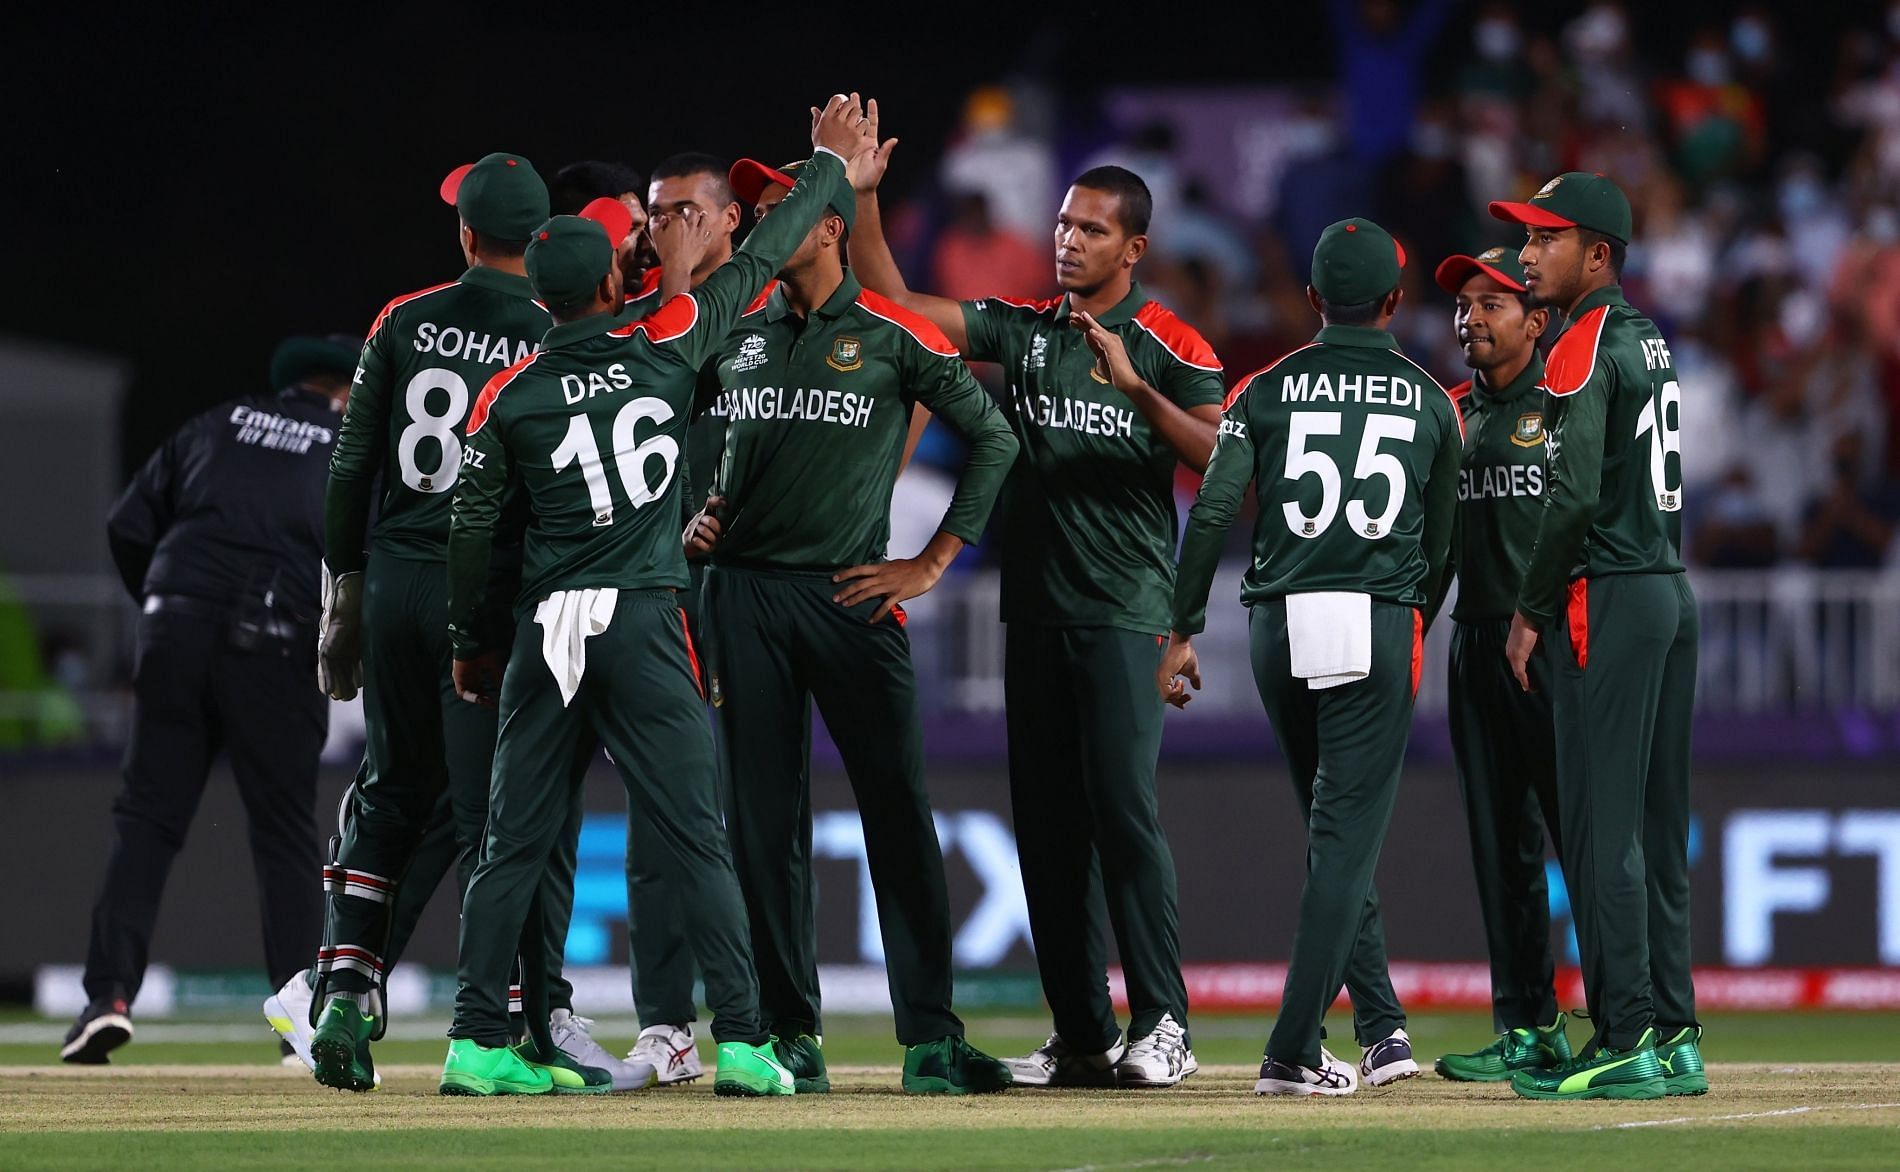 Bangladesh team during the match against Scotland. Pic: T20WorldCup/ Twitter